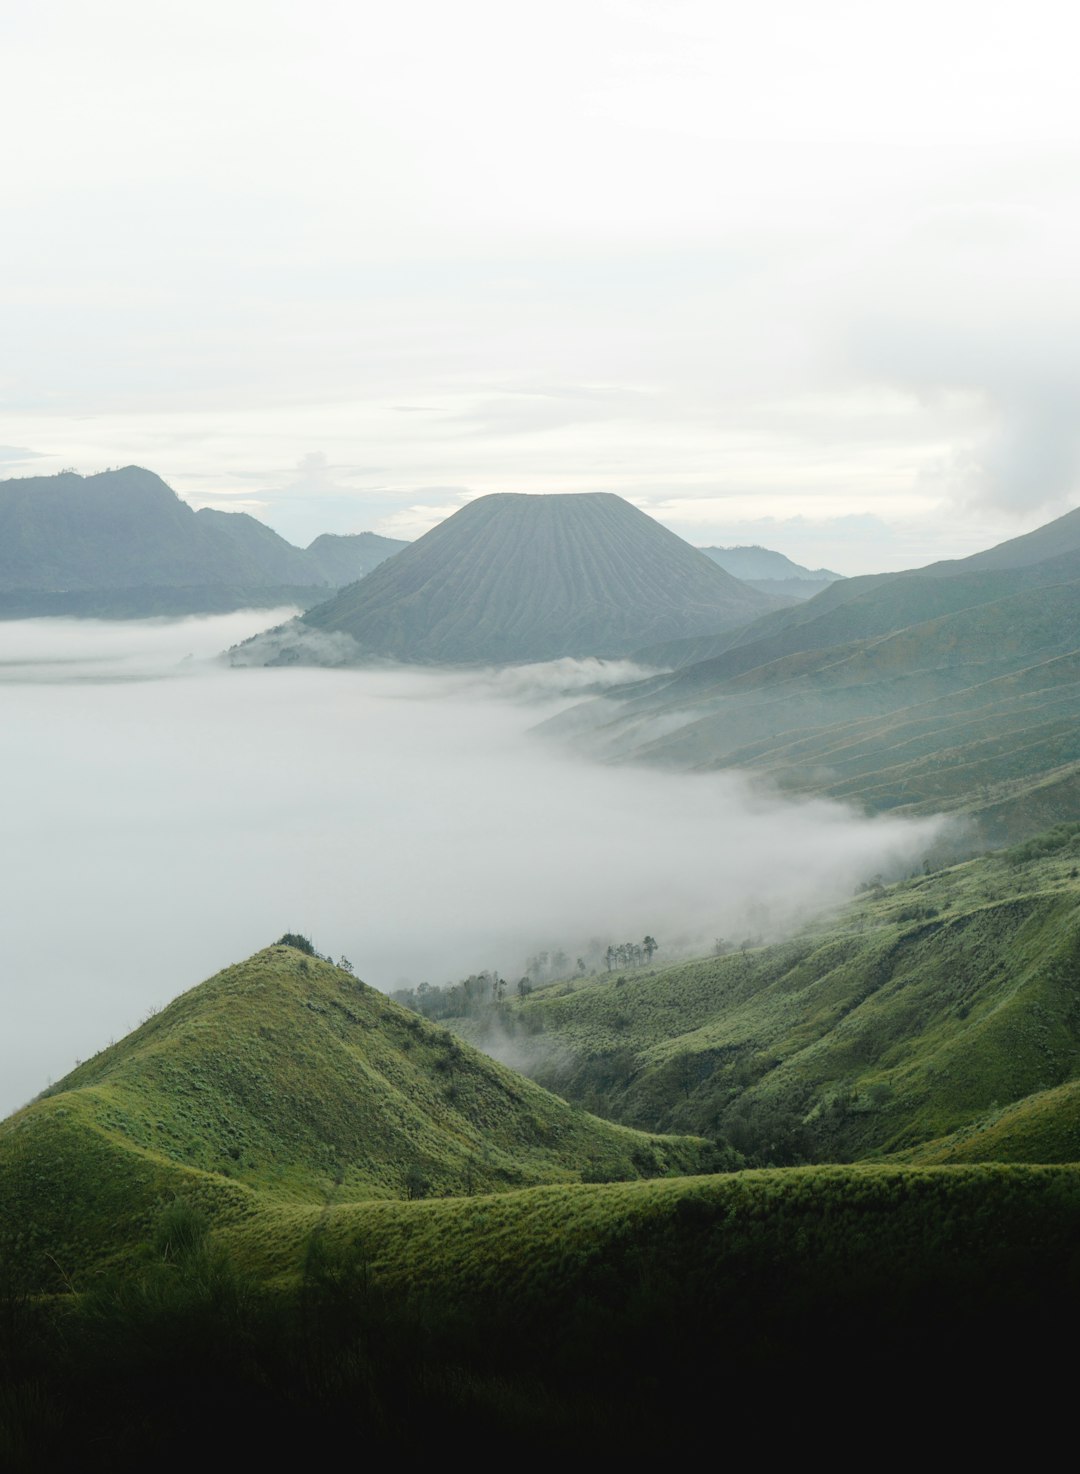 travelers stories about Hill in Bromo Tengger Semeru National Park, Indonesia